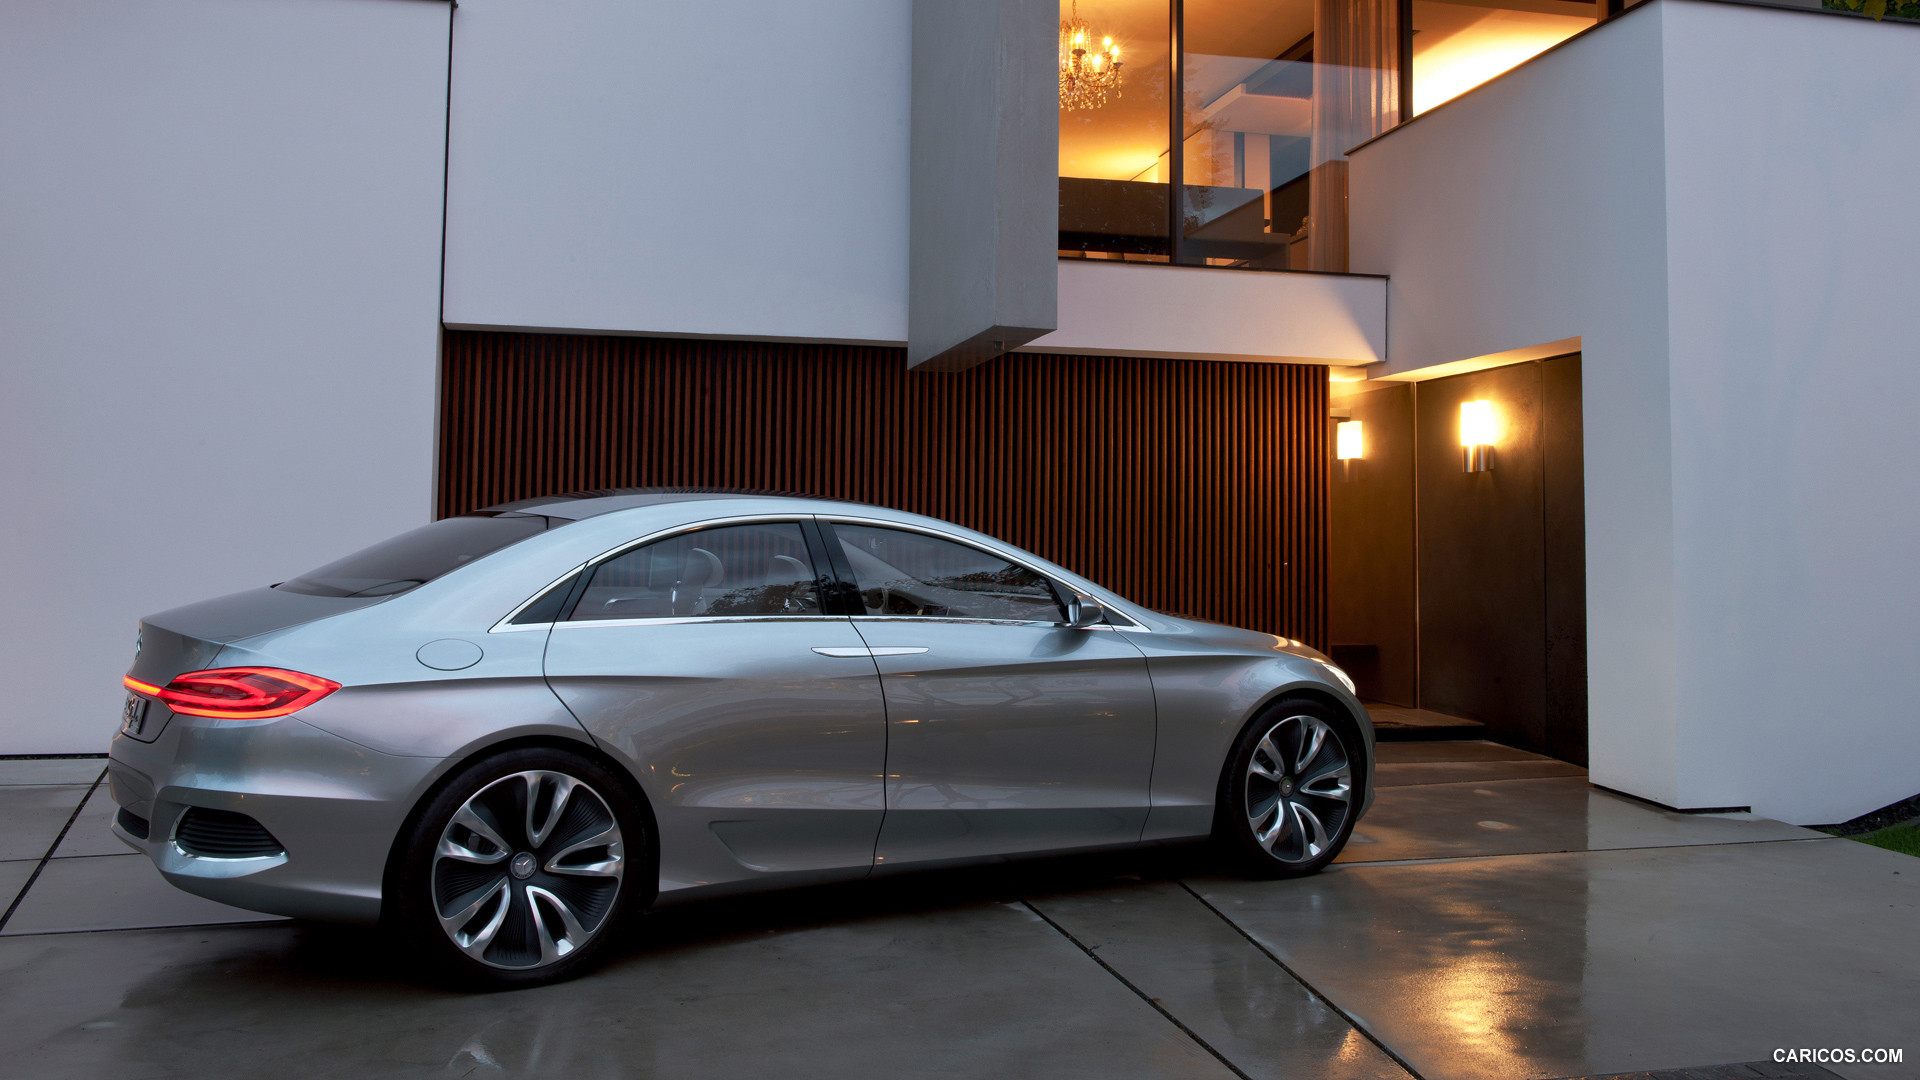 Mercedes-Benz F800 Style Concept (2010)  - Side, #30 of 120